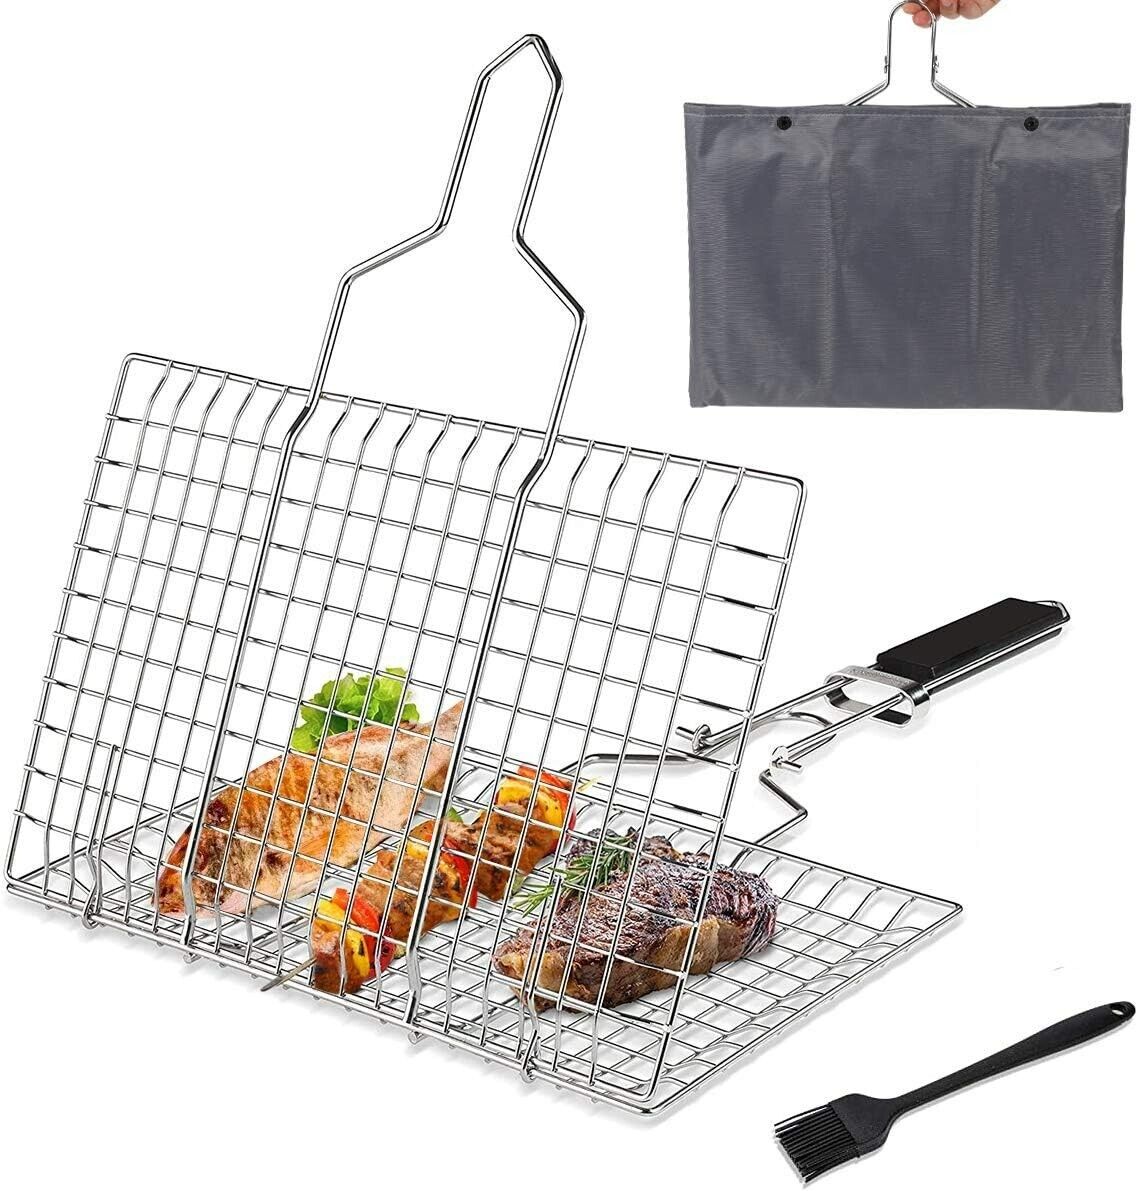 BBQ Grilling Basket, Foldable Stainless Steel Barbecue Grill Basket for Fish Veg